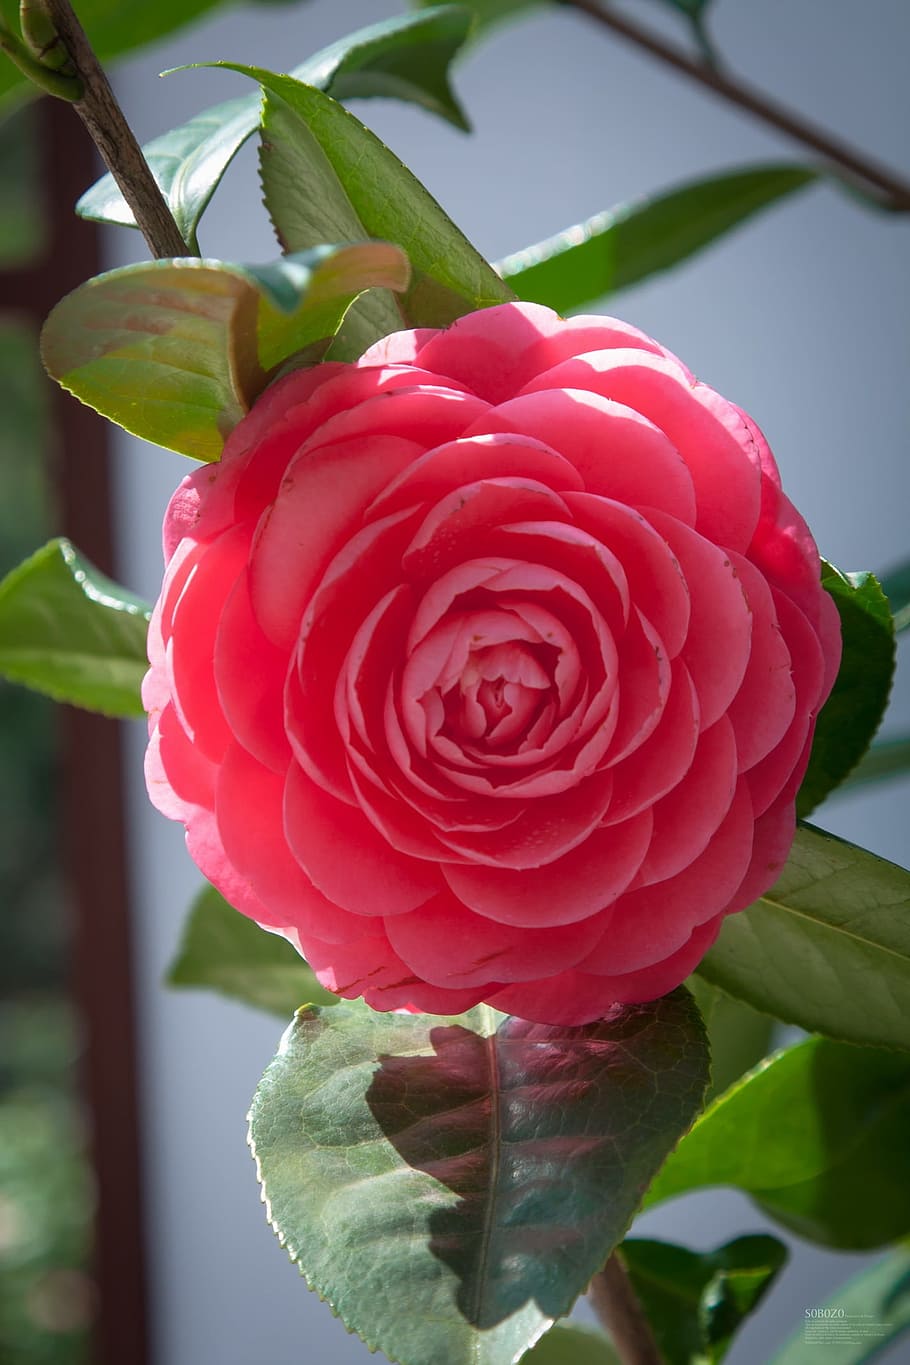 camellia, bloom, plant, red, close-up, freshness, growth, beauty in nature